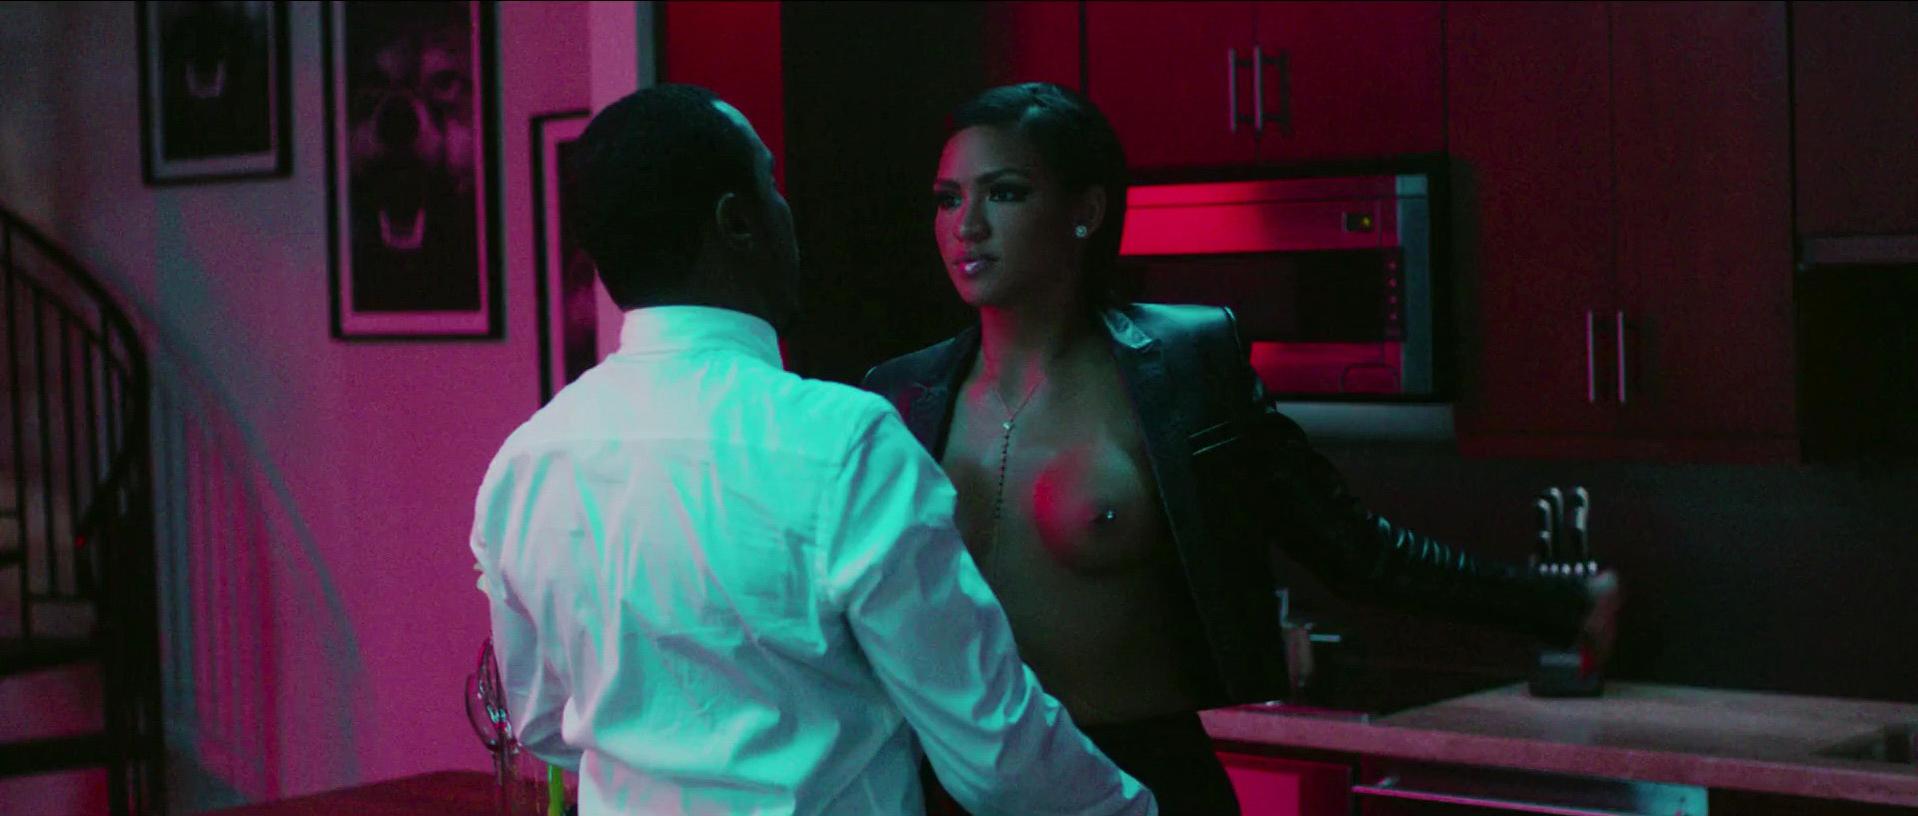 There is not much other real nudity but Cassie Ventura looks quite sexy. 